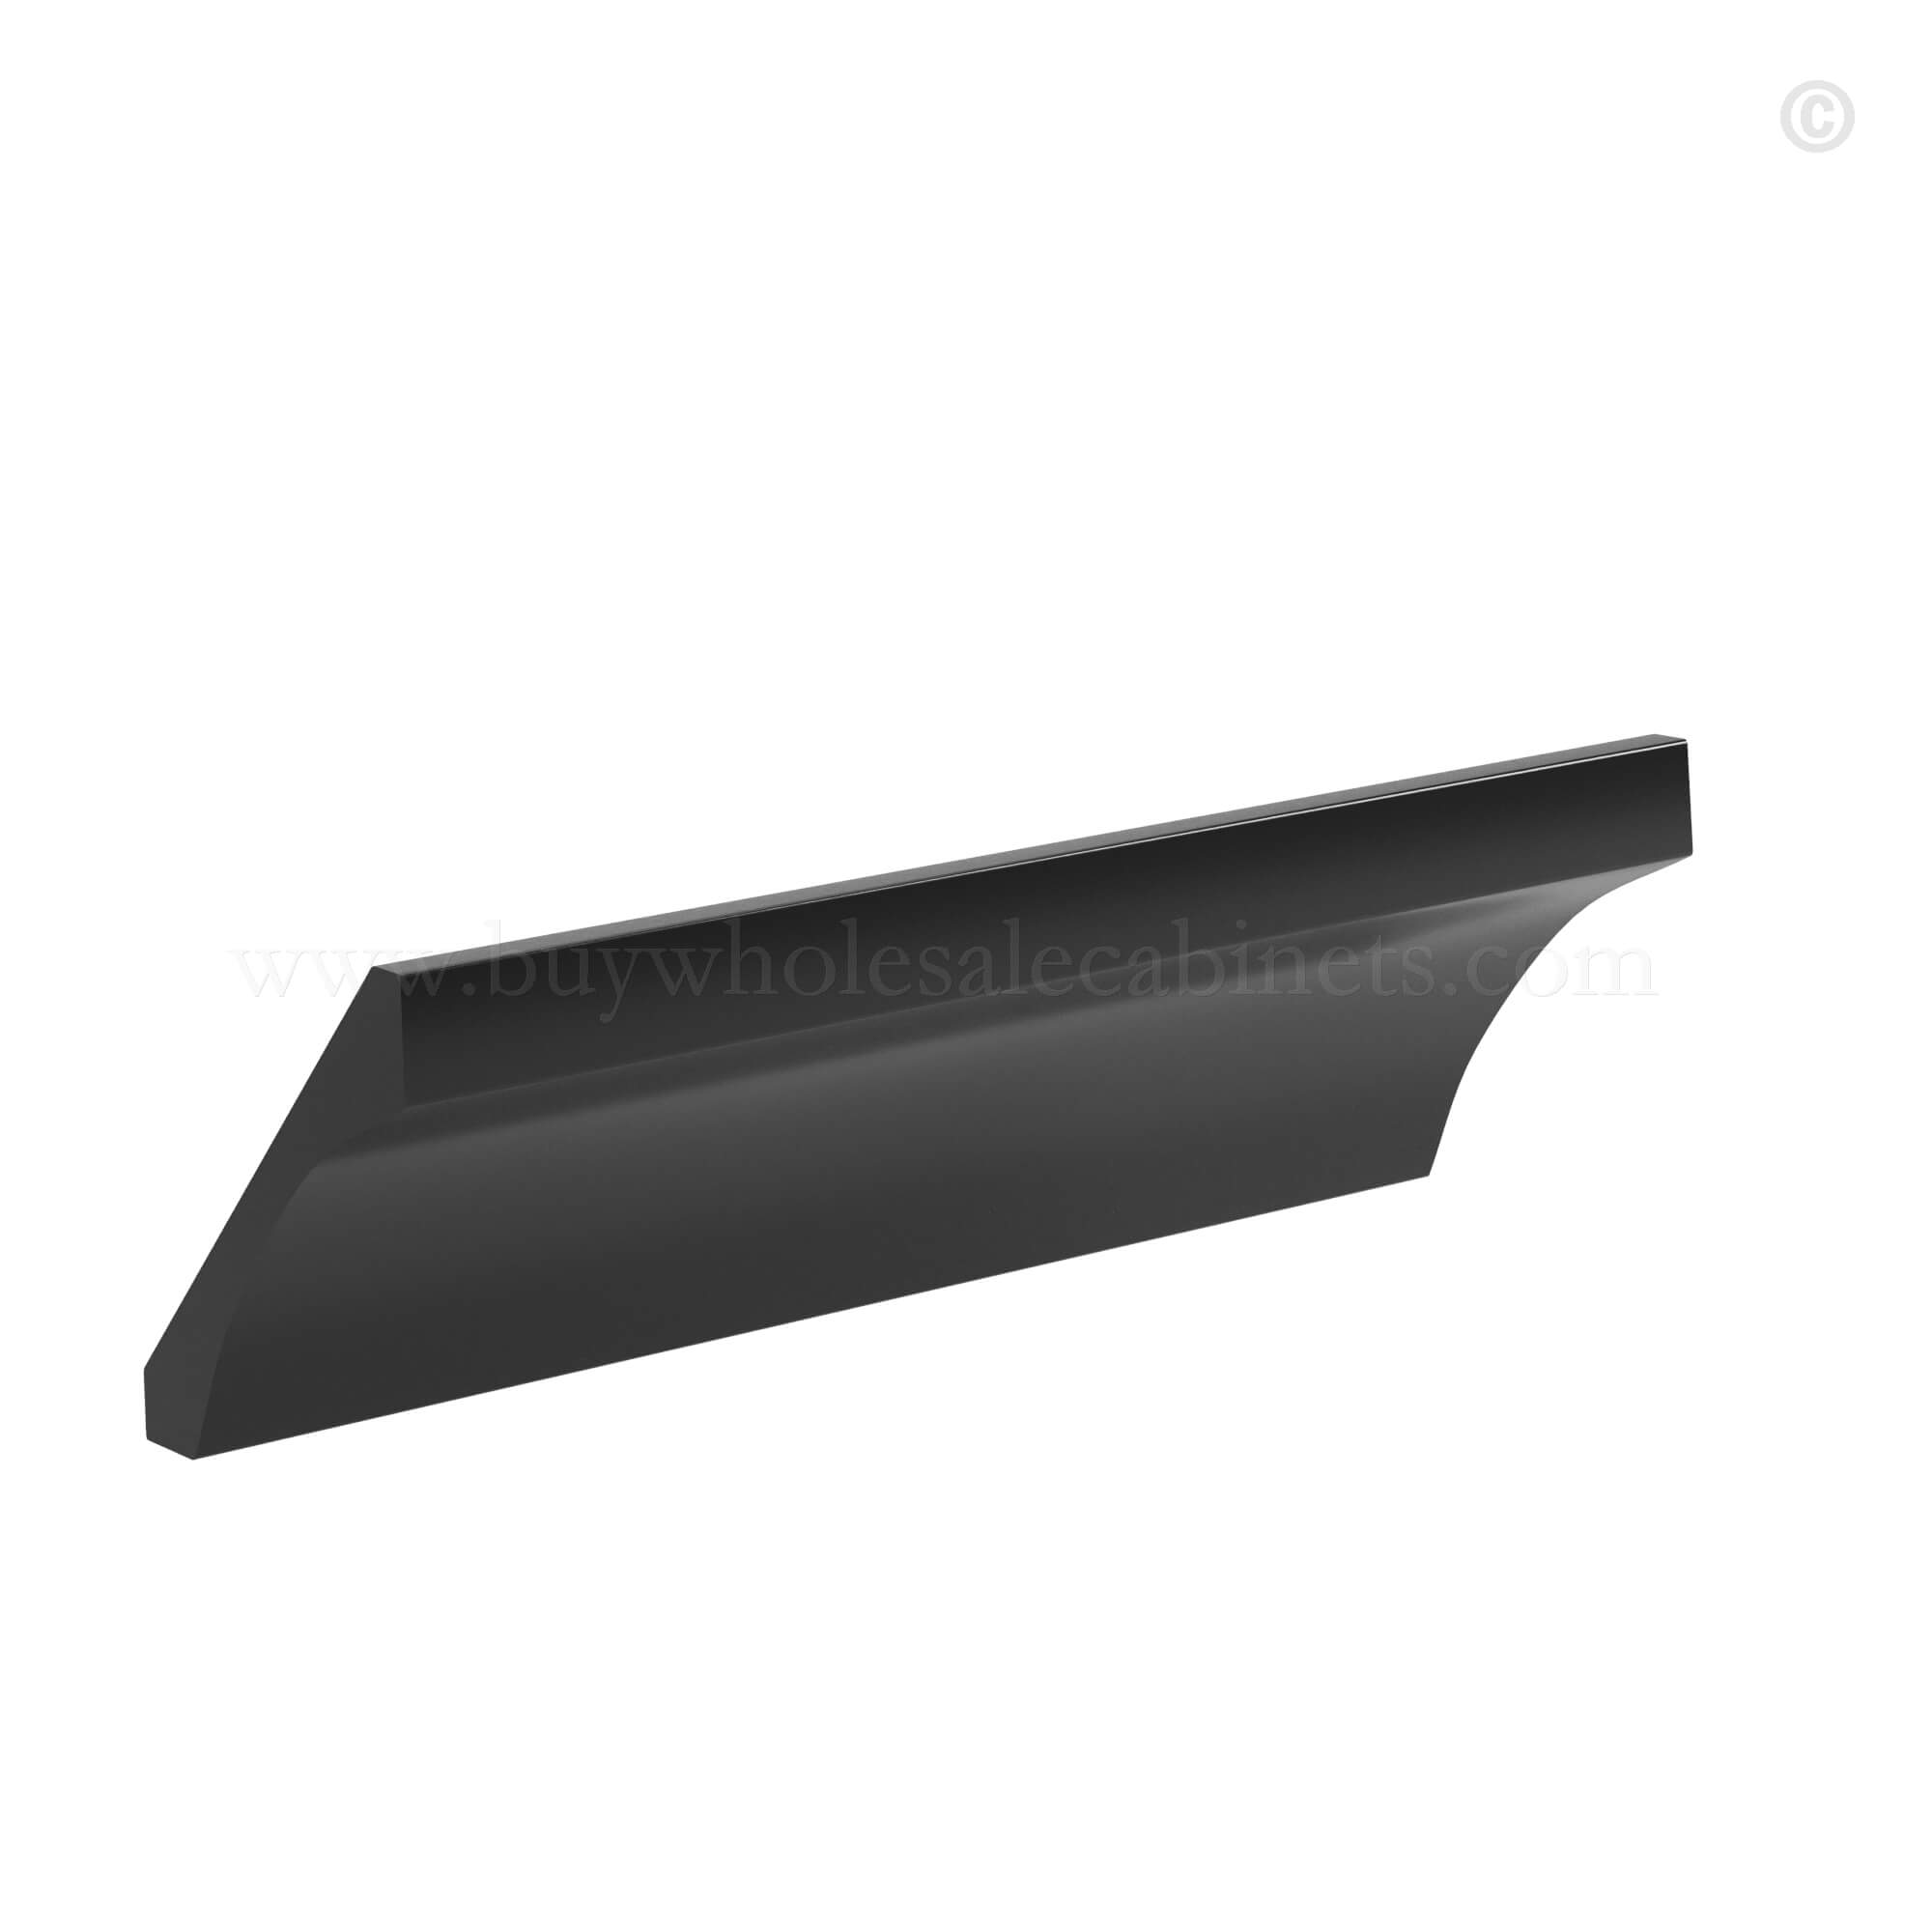 Black Shaker Crown Moulding 3 3/4″ Tall With Heel, rta cabinets, wholesale cabinets